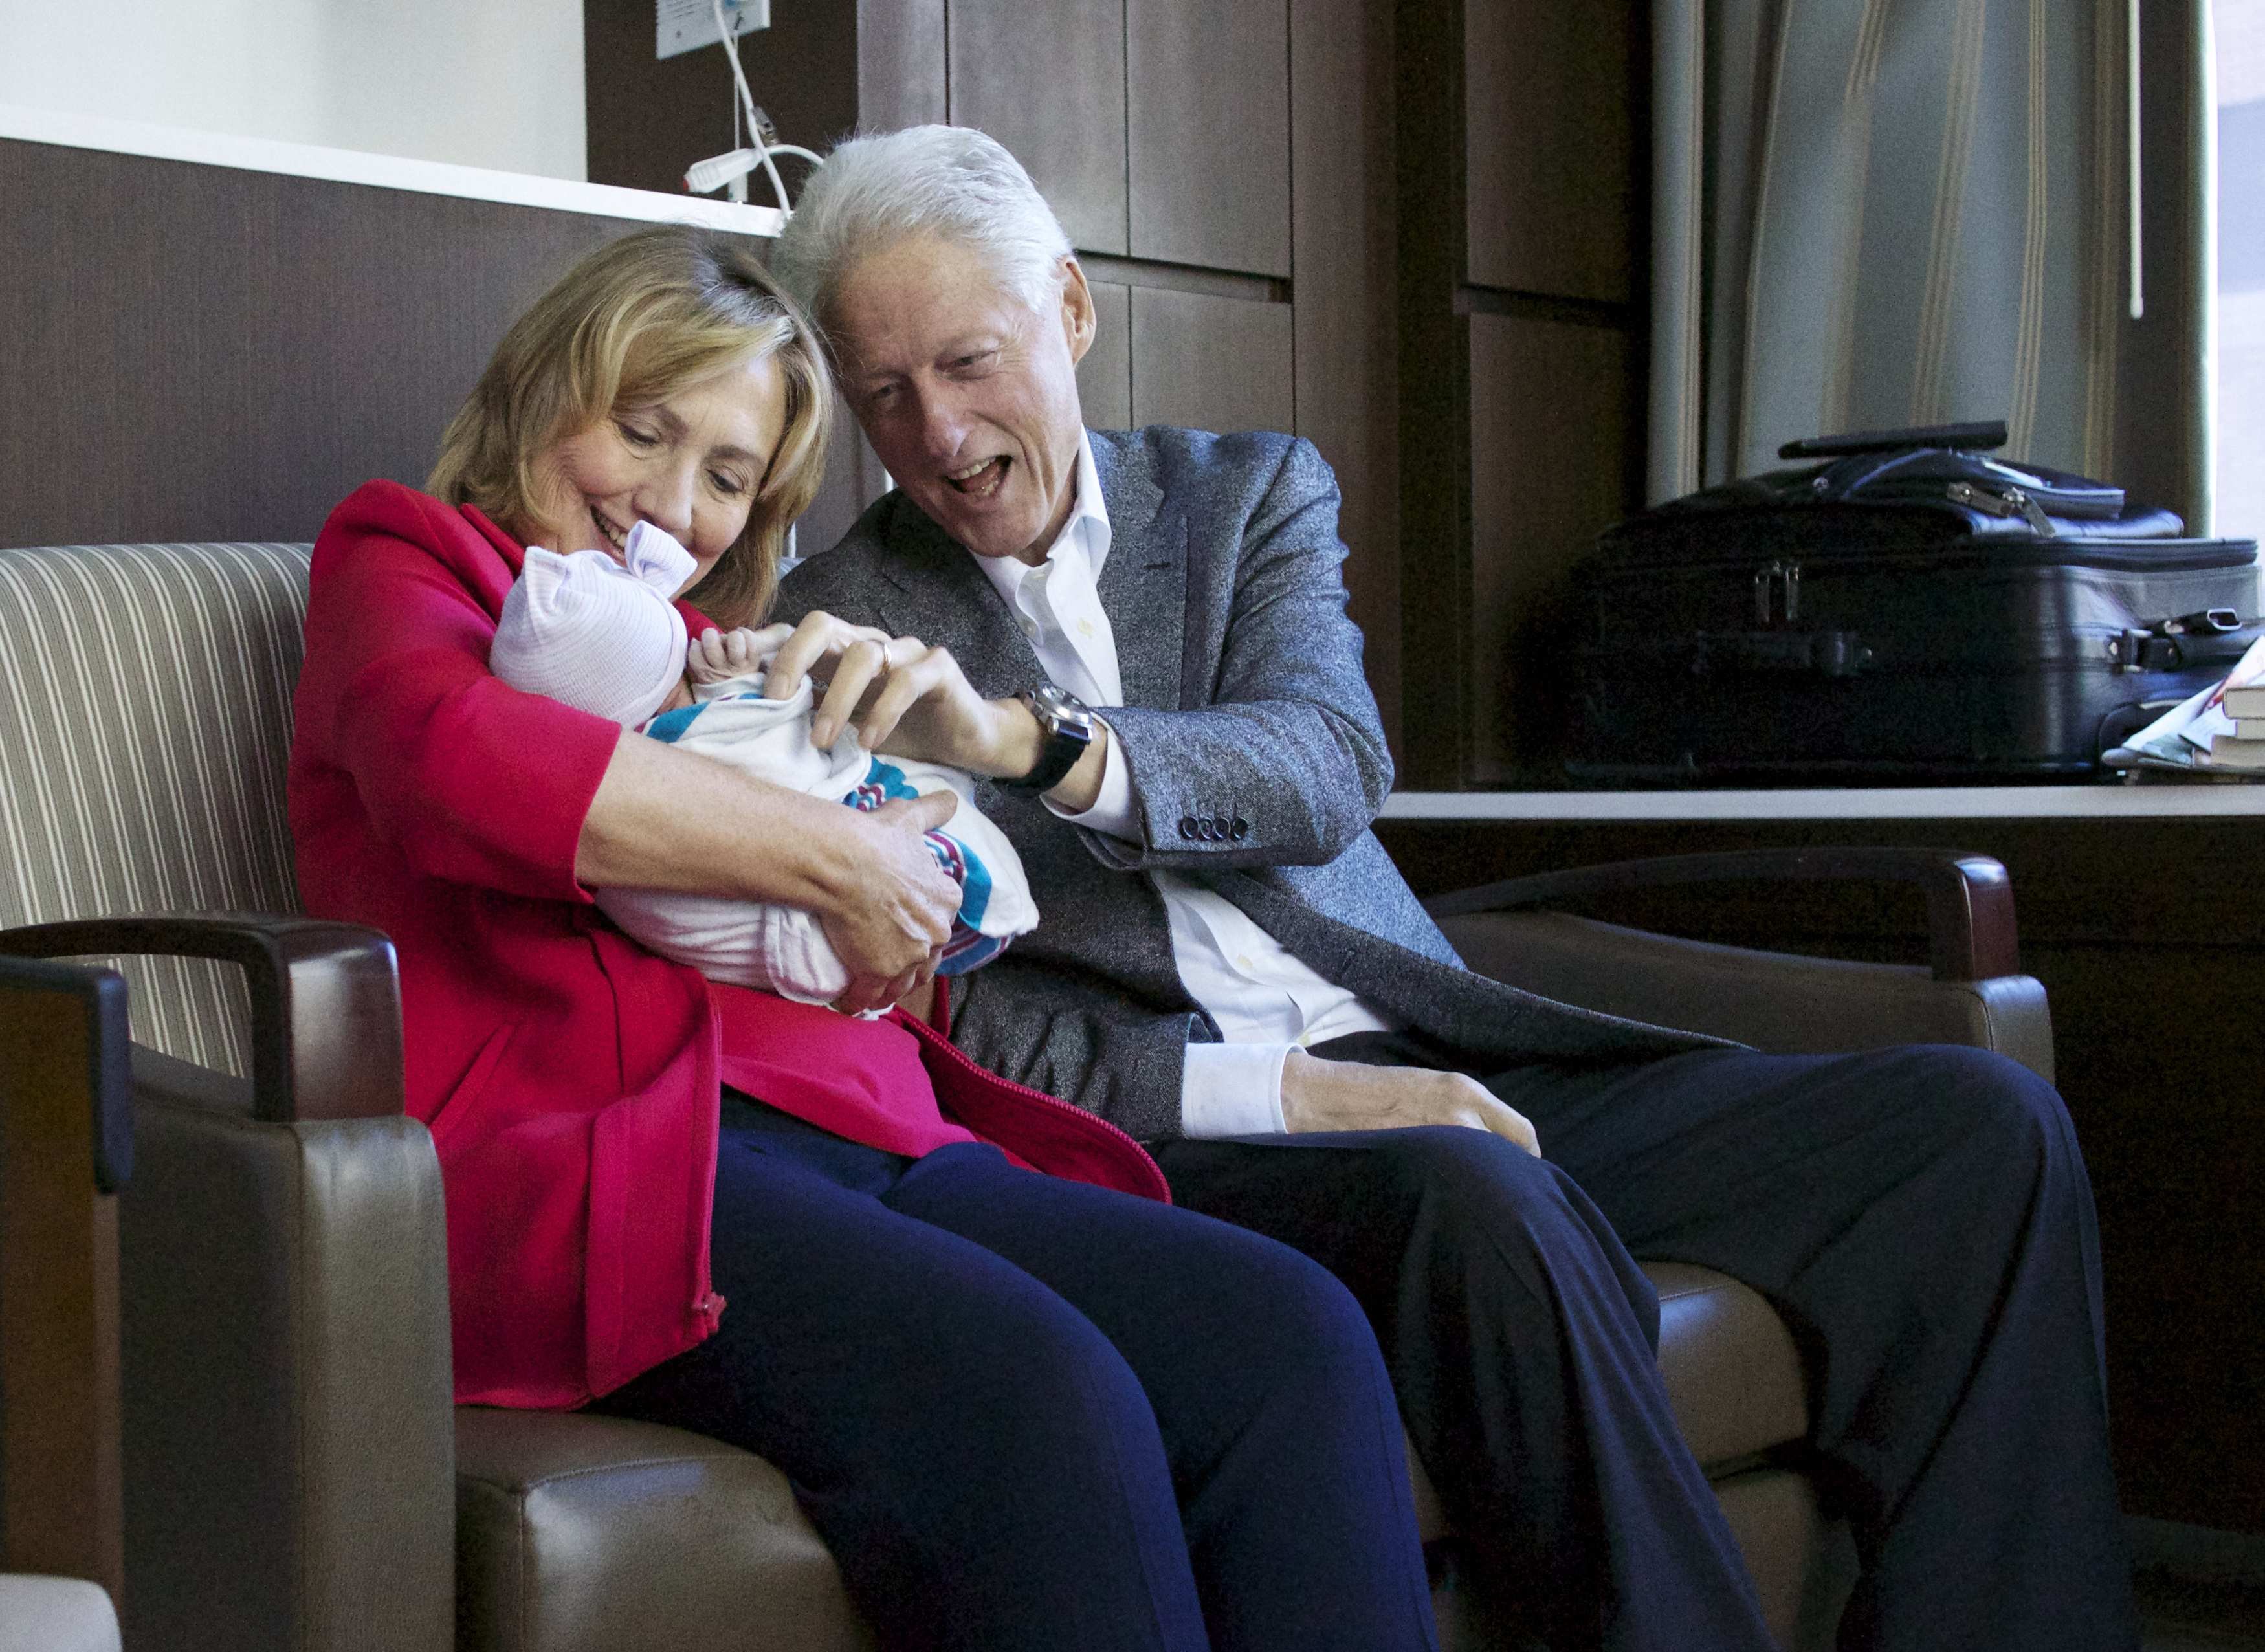 Former President Bill Clinton and his wife, former Secretary of State Hillary Clinton, hold their granddaughter Charlotte Clinton Mezvinsky after their daughter Chelsea Clinton gave birth in New York on Sept. 27, 2014. (Jon Davidson—Reuters)